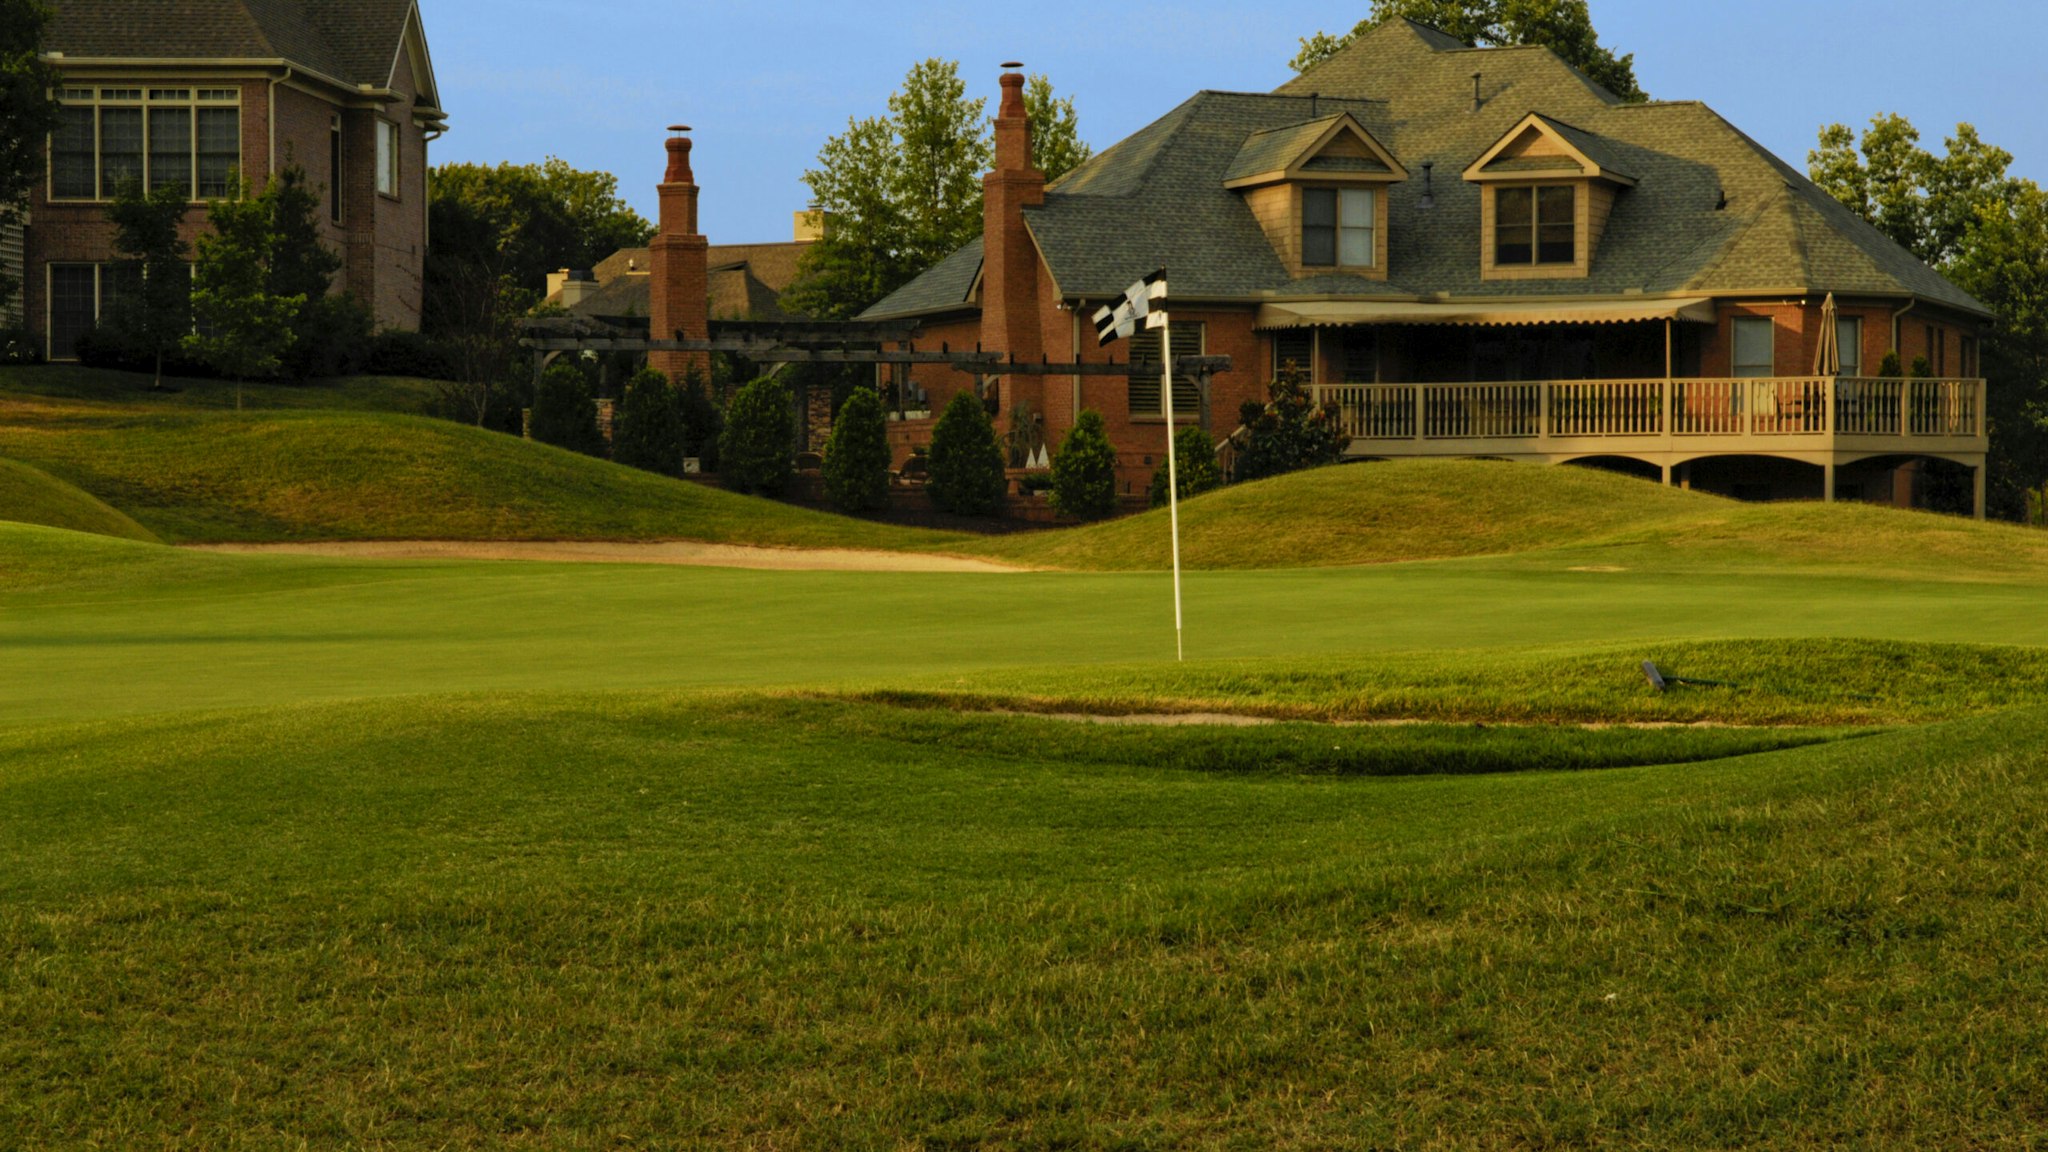 this color image is of a Putting Green on Professional Golf Course near Luxury Homes. the putting green has manicured grass or lawn with two sand traps around the outside of the putting green and putting hole. the grass is green and their are expensive houses or homes in the background. the photo was taken during the spring or summer. and the lighting is natural sunlight during the evening part of the day. there are also trees with leaves in the background.